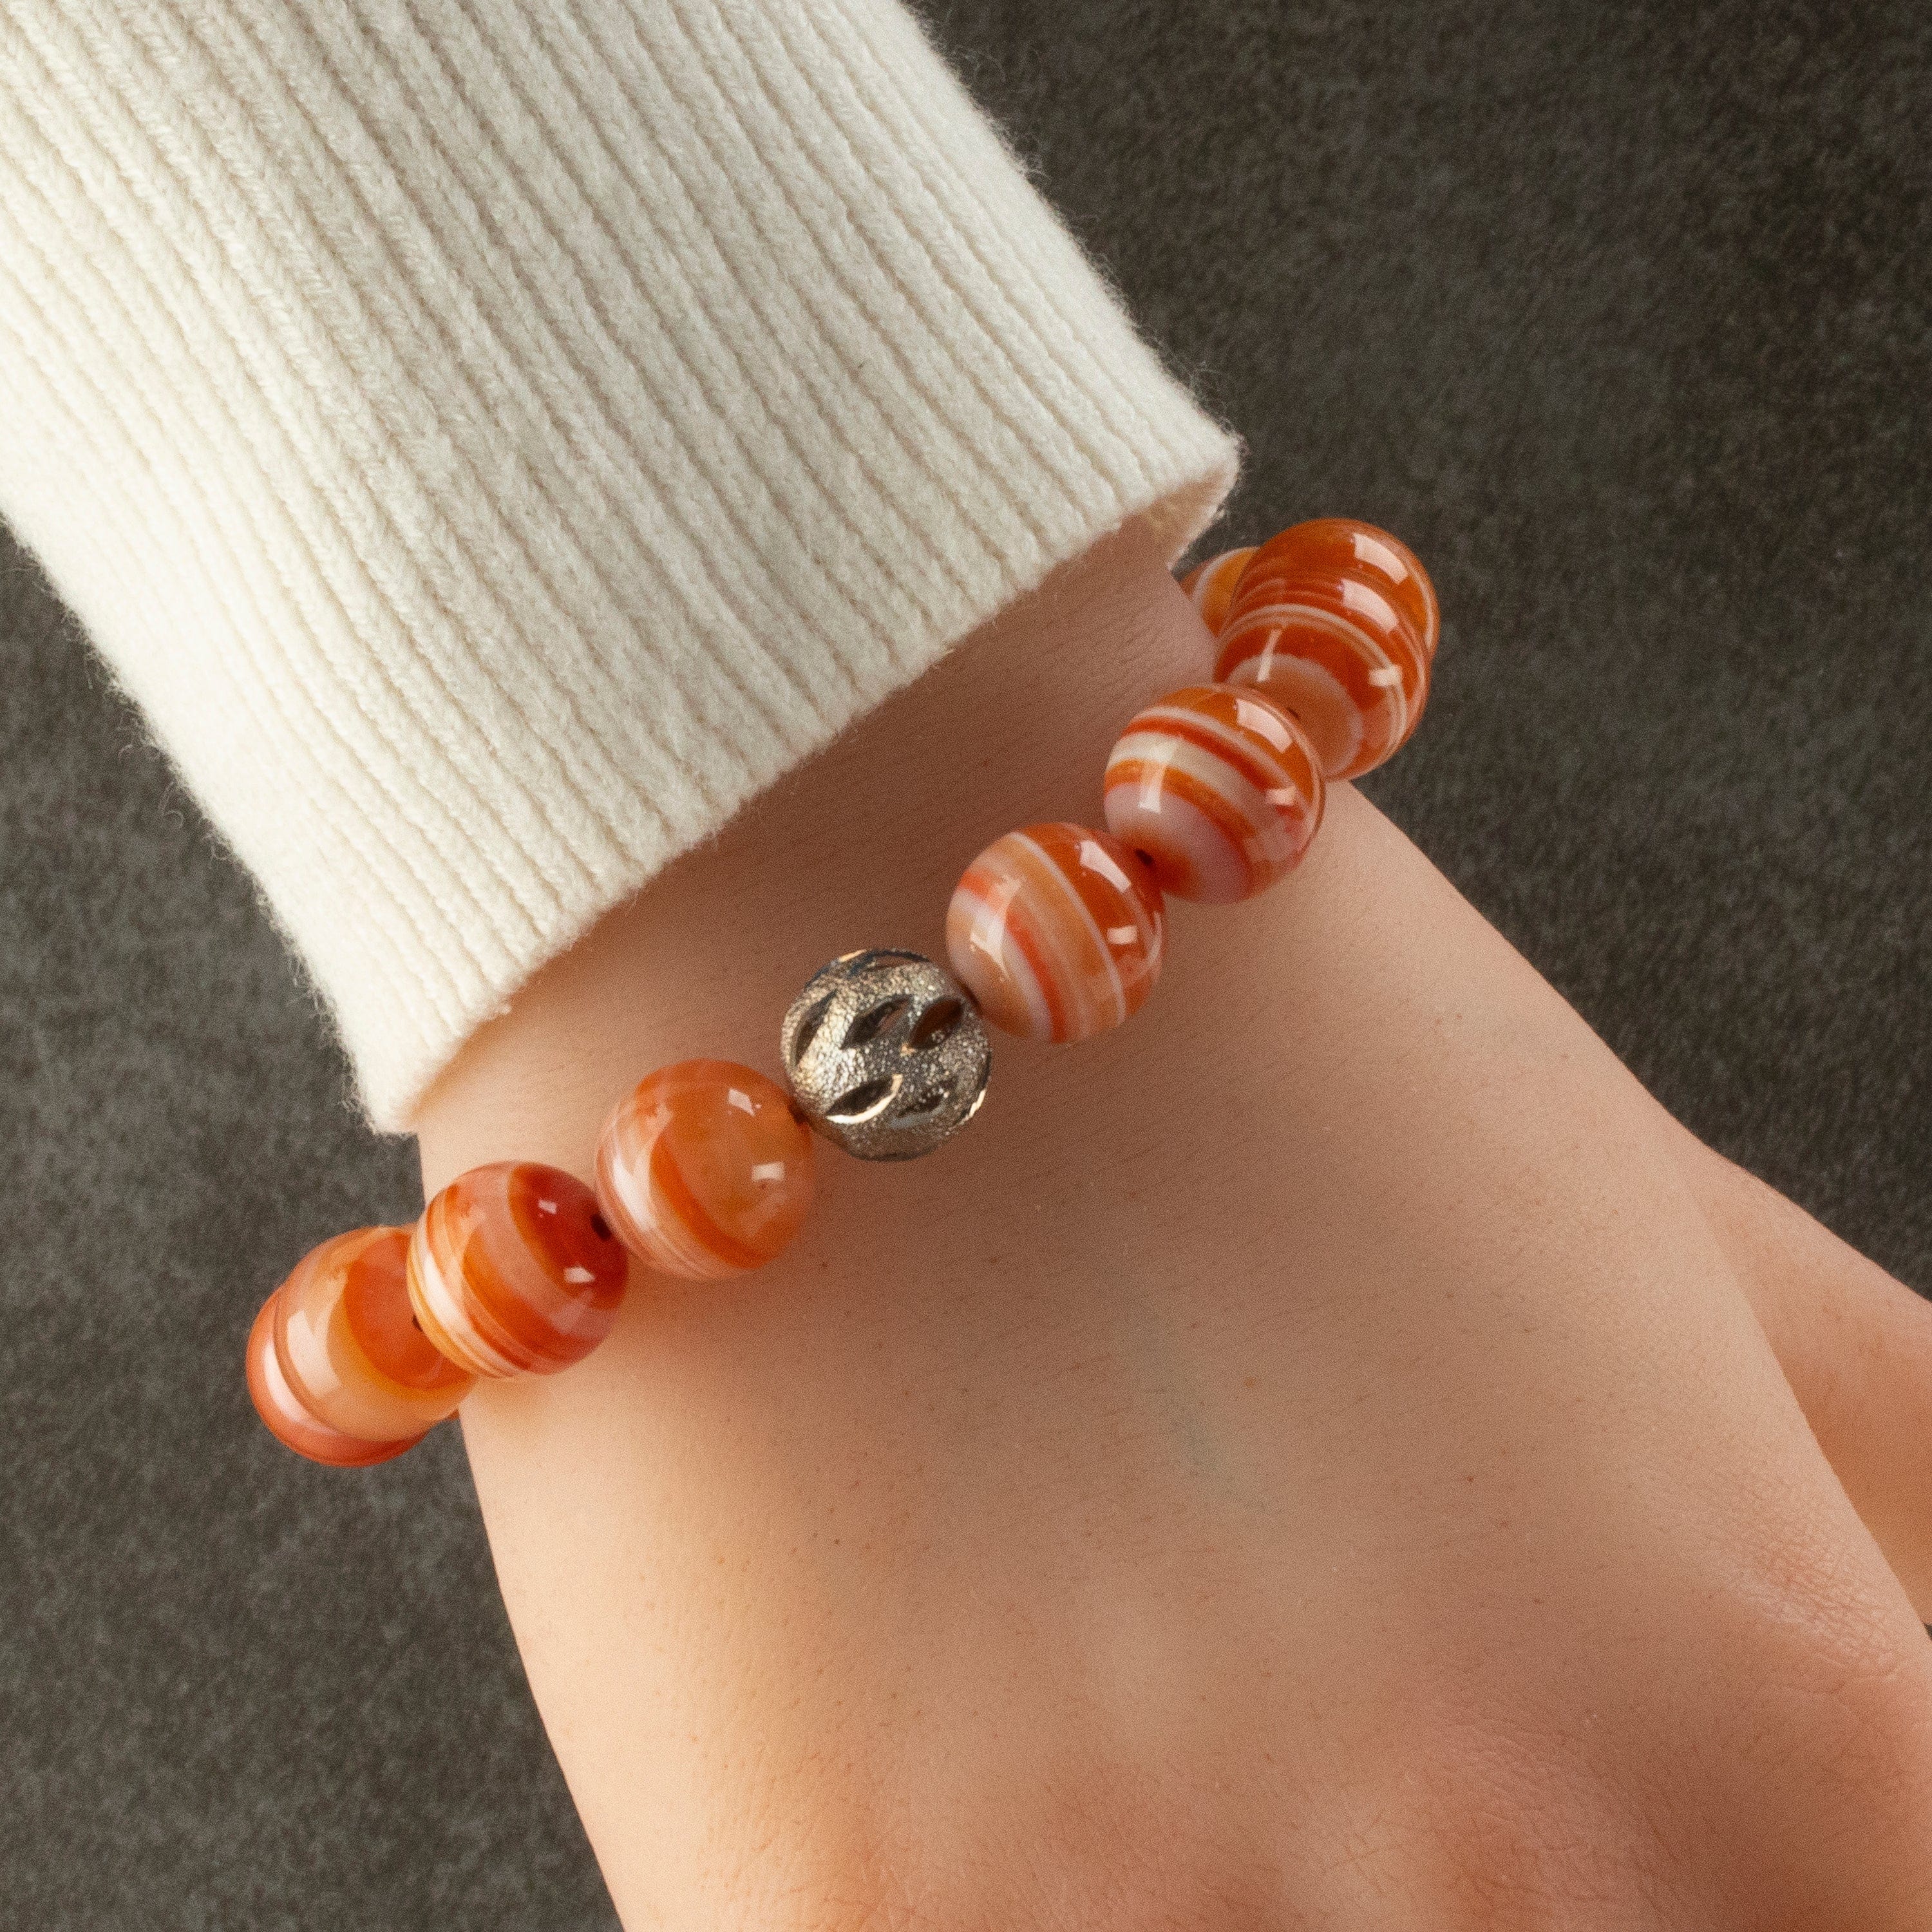 Carnelian and Sterling Silver Bracelet With Toggle Clasp-8 1/4 Inches Long.  Fits a Larger Wrist. Free Shipping. - Etsy